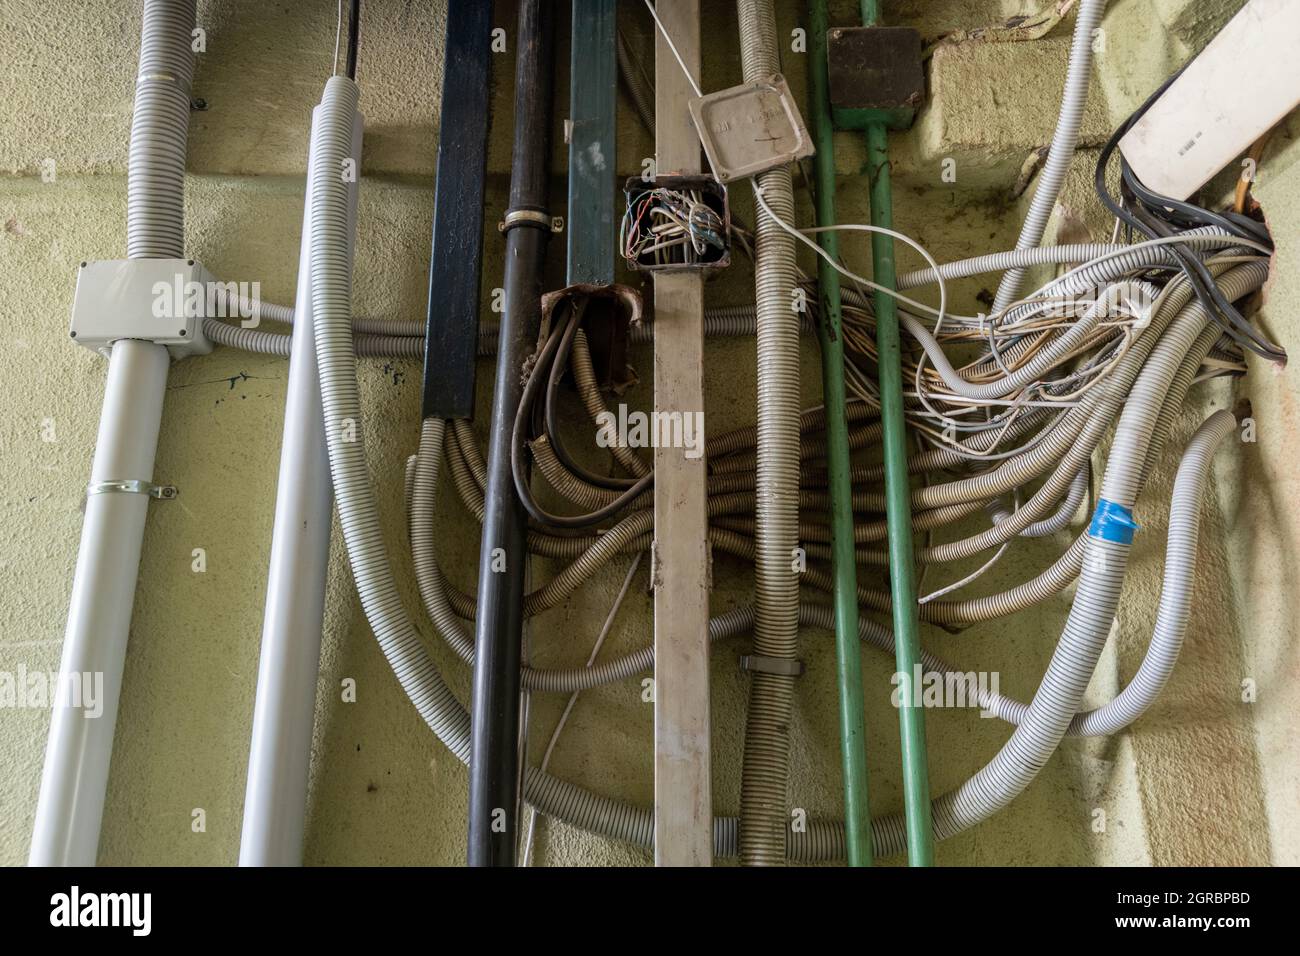 Messy And Careless Wiring Inside Of Public Building Stock Photo